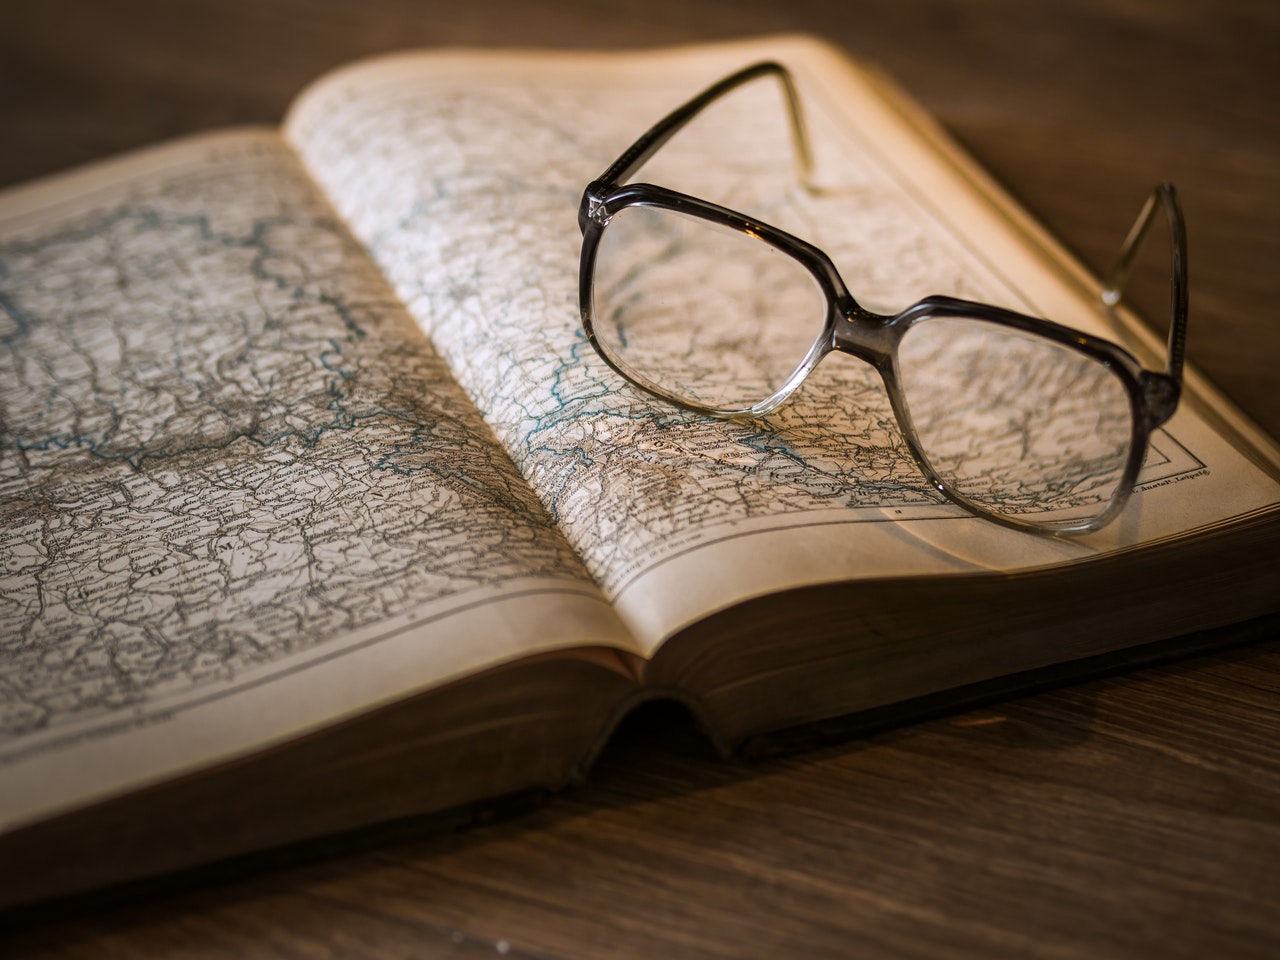 Book of maps sitting on table with pair of glasses on top of it